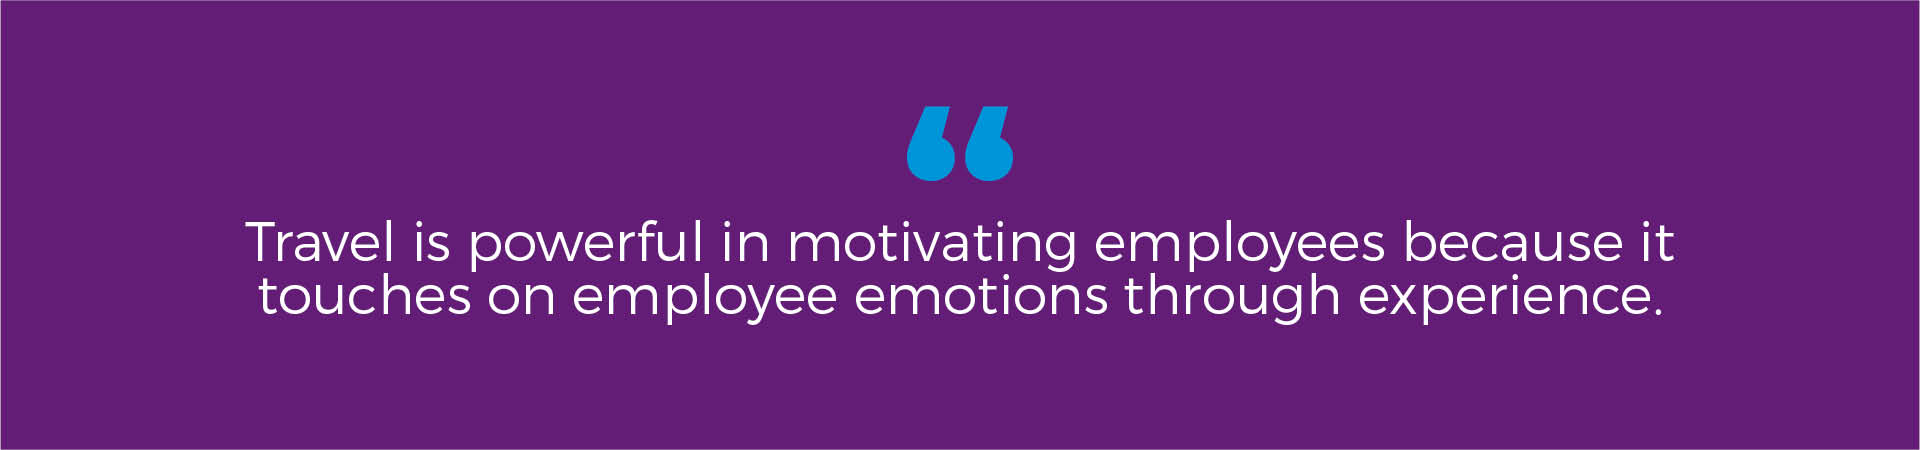 : Travel is powerful in motivating employees because it touches on employee emotions through experience.